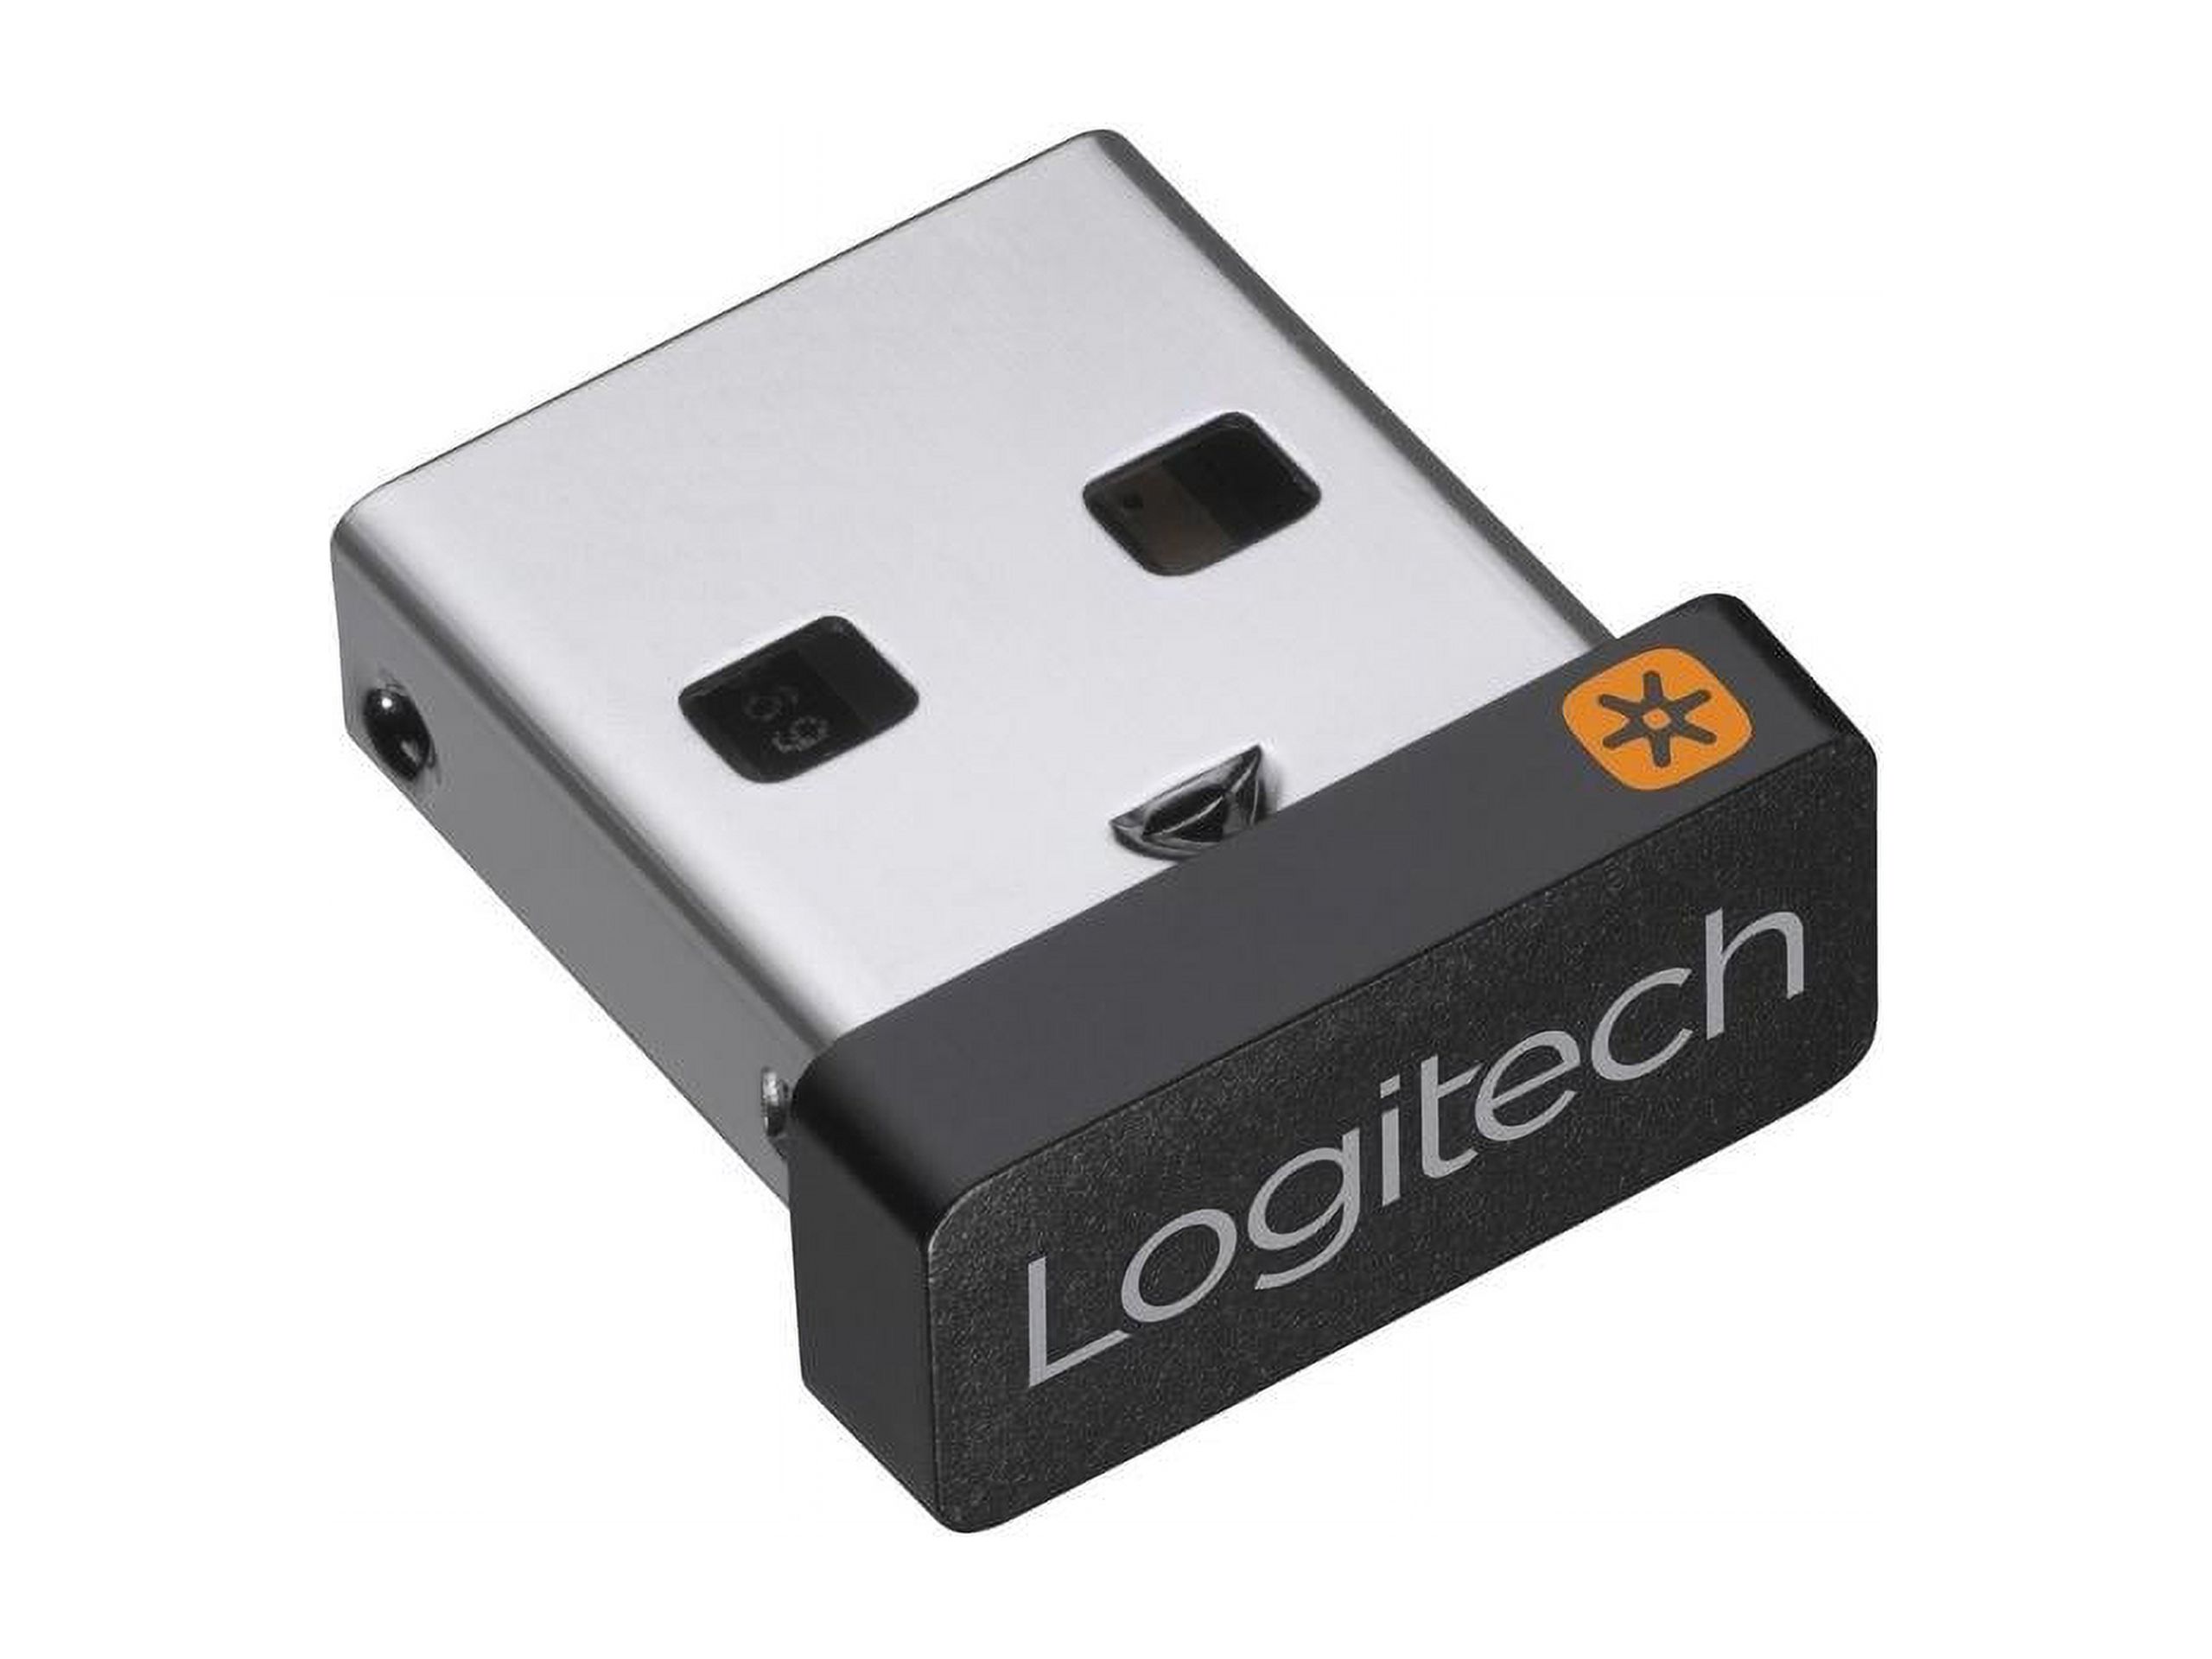 Logitech Wireless Mouse / Keyboard USB Unifying Receiver - image 2 of 20